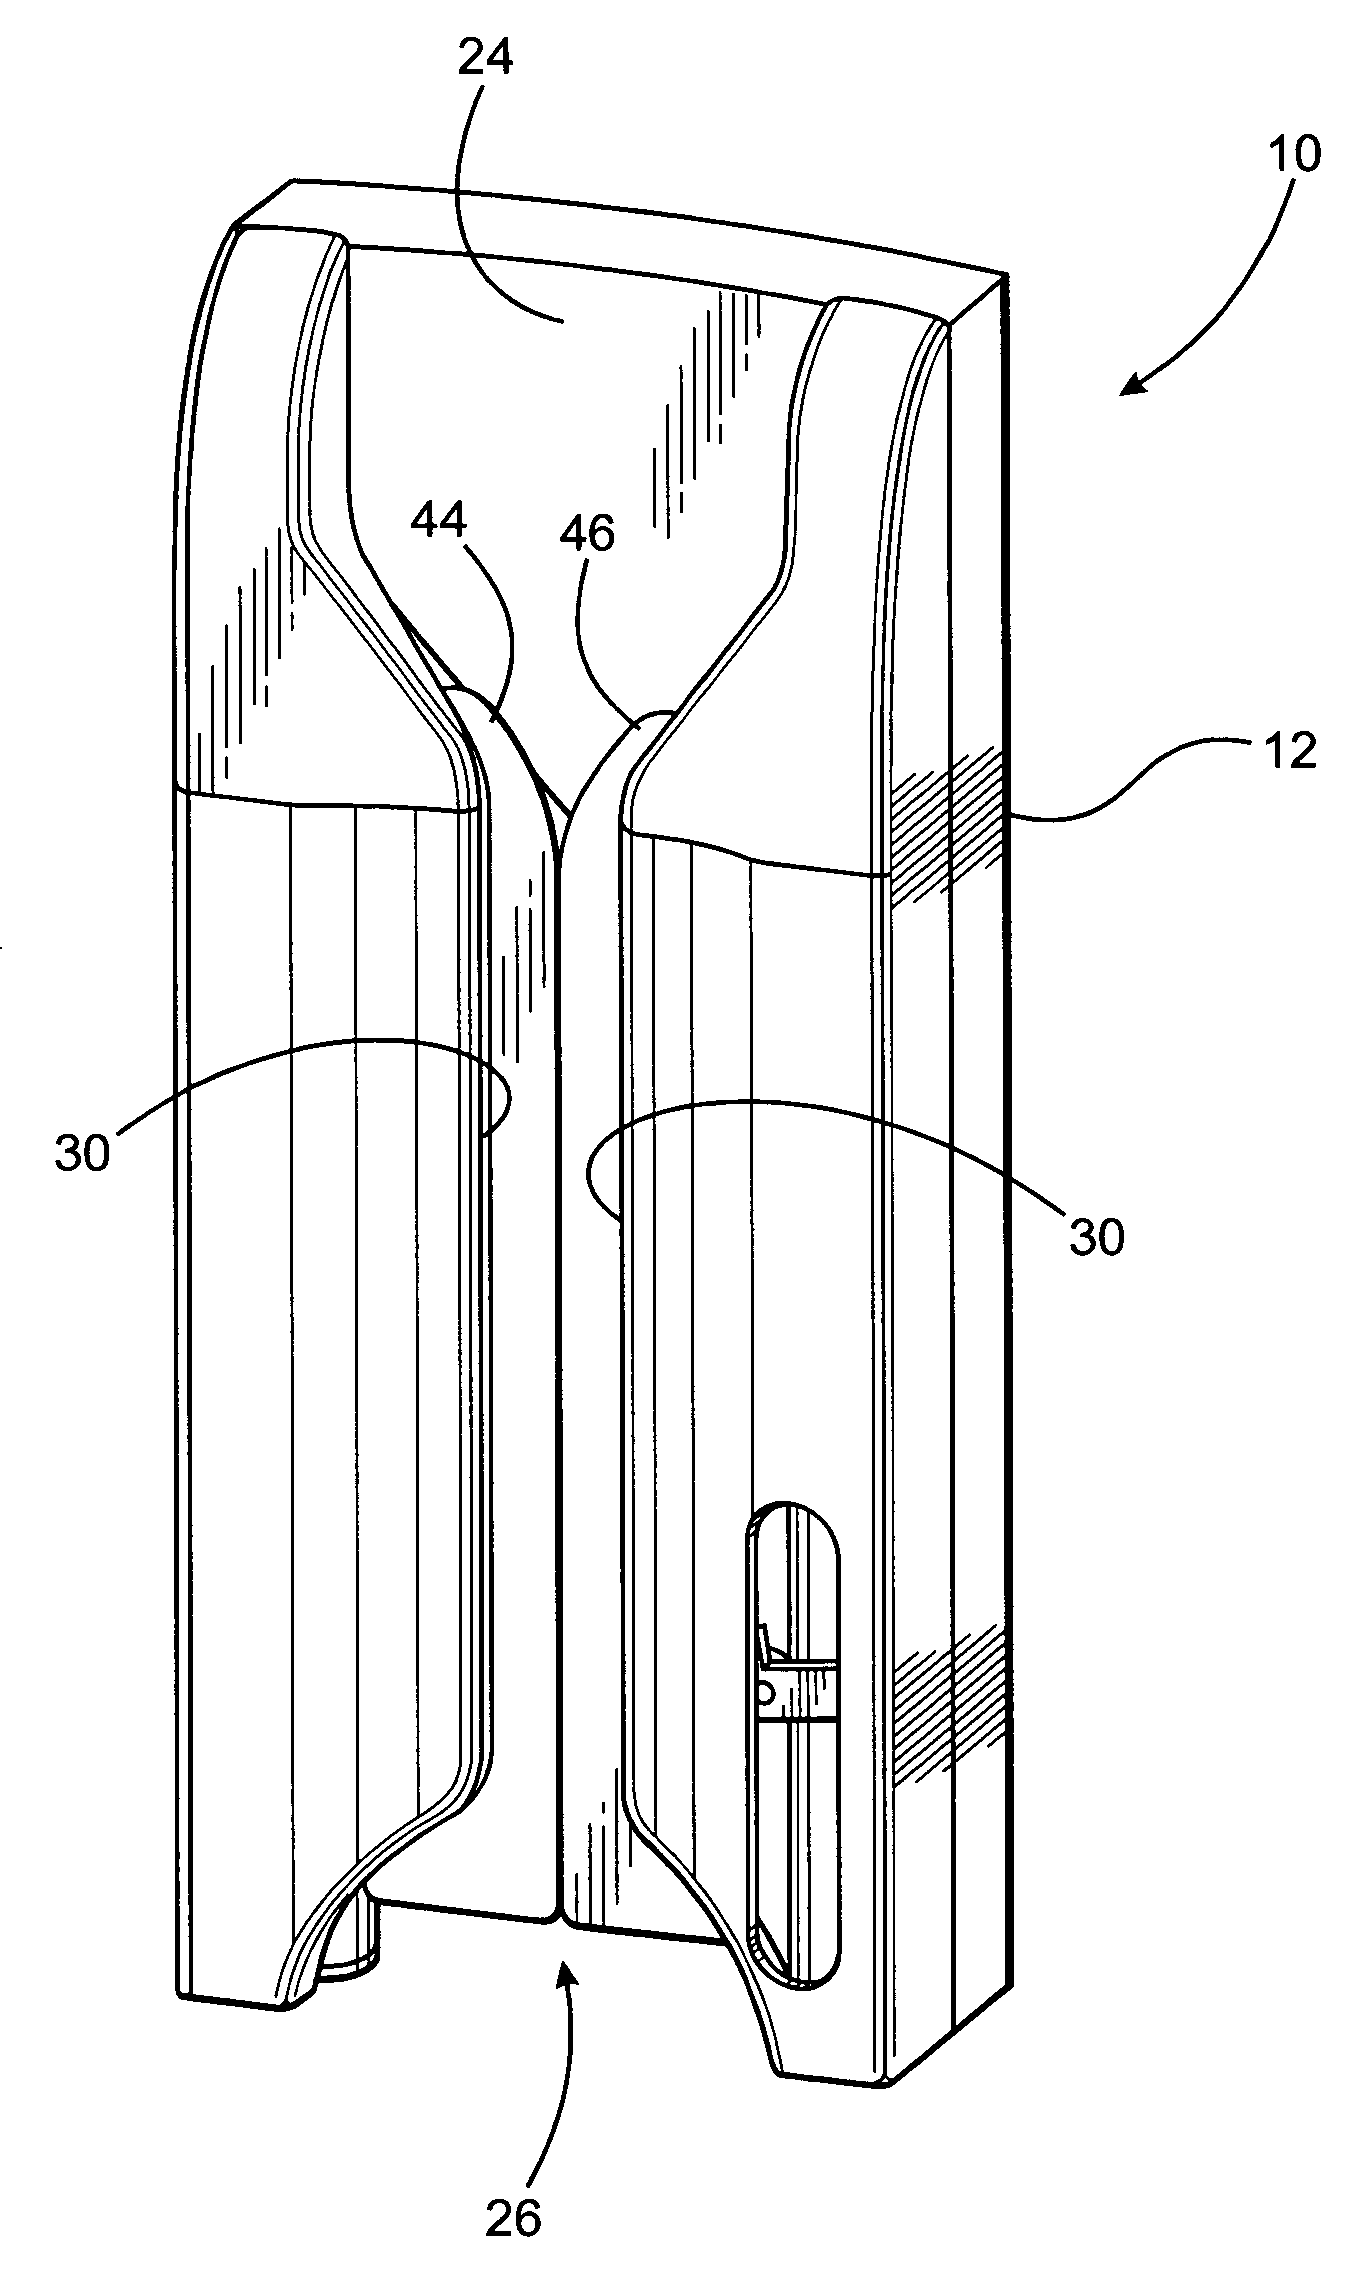 Assembly for delivering protective barriers onto stethoscope heads